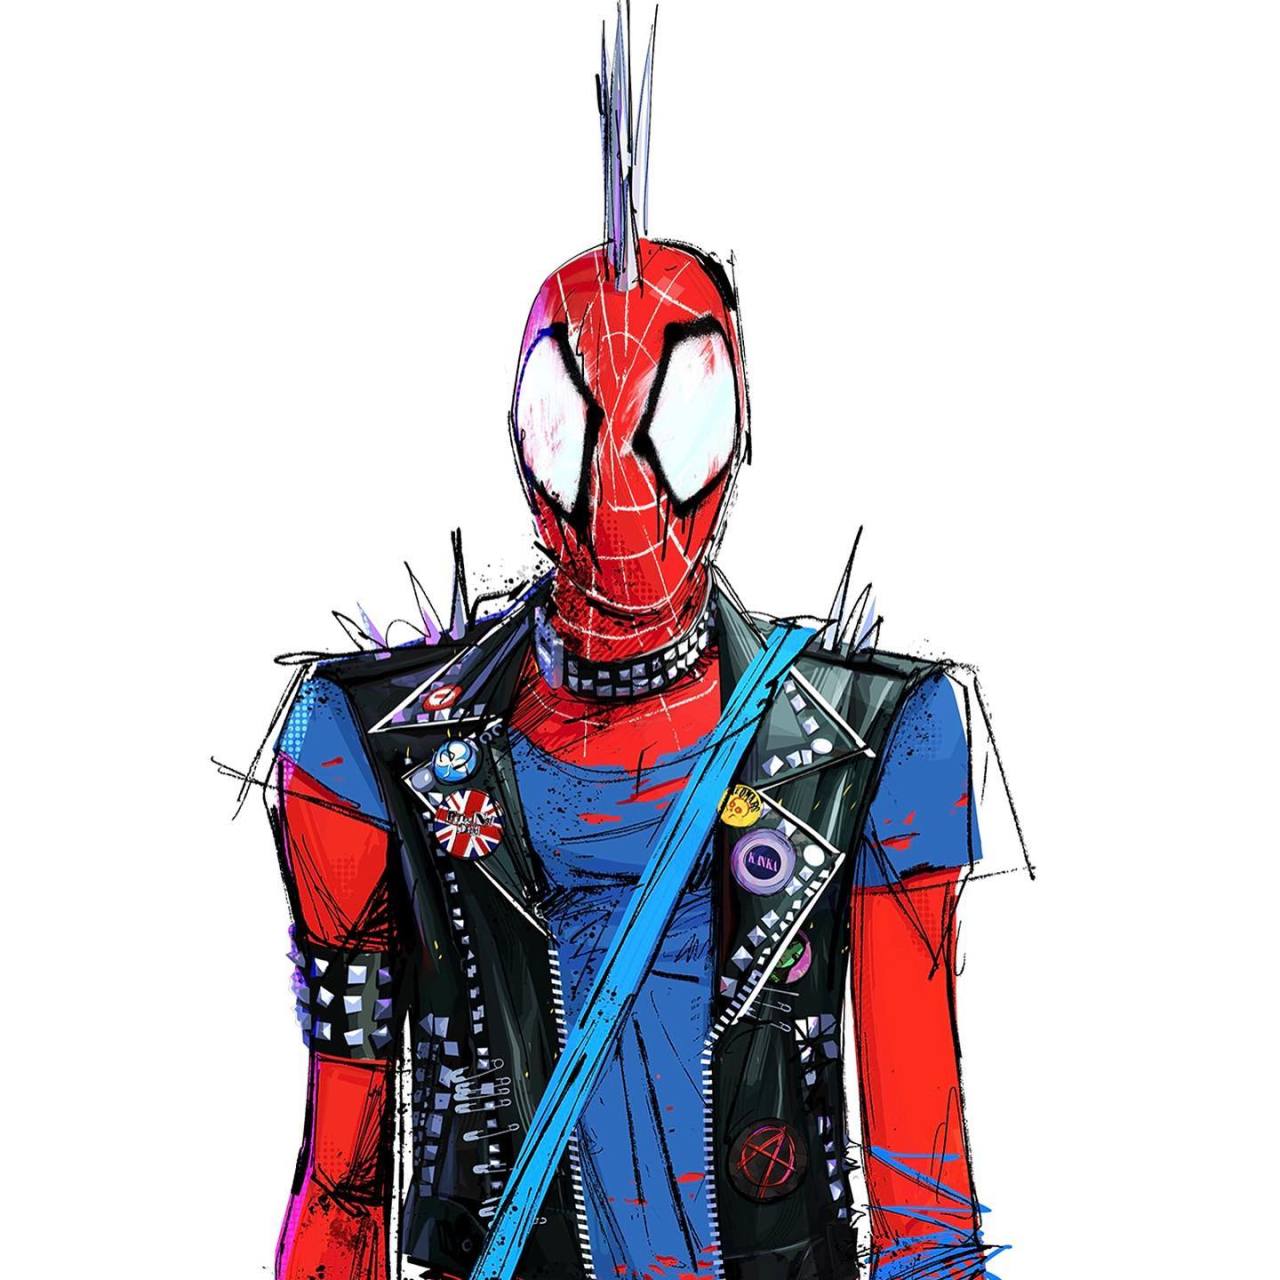 An artist plus a real big geek — DETAILED SPIDERPUNK REFERENCES!! And some  words